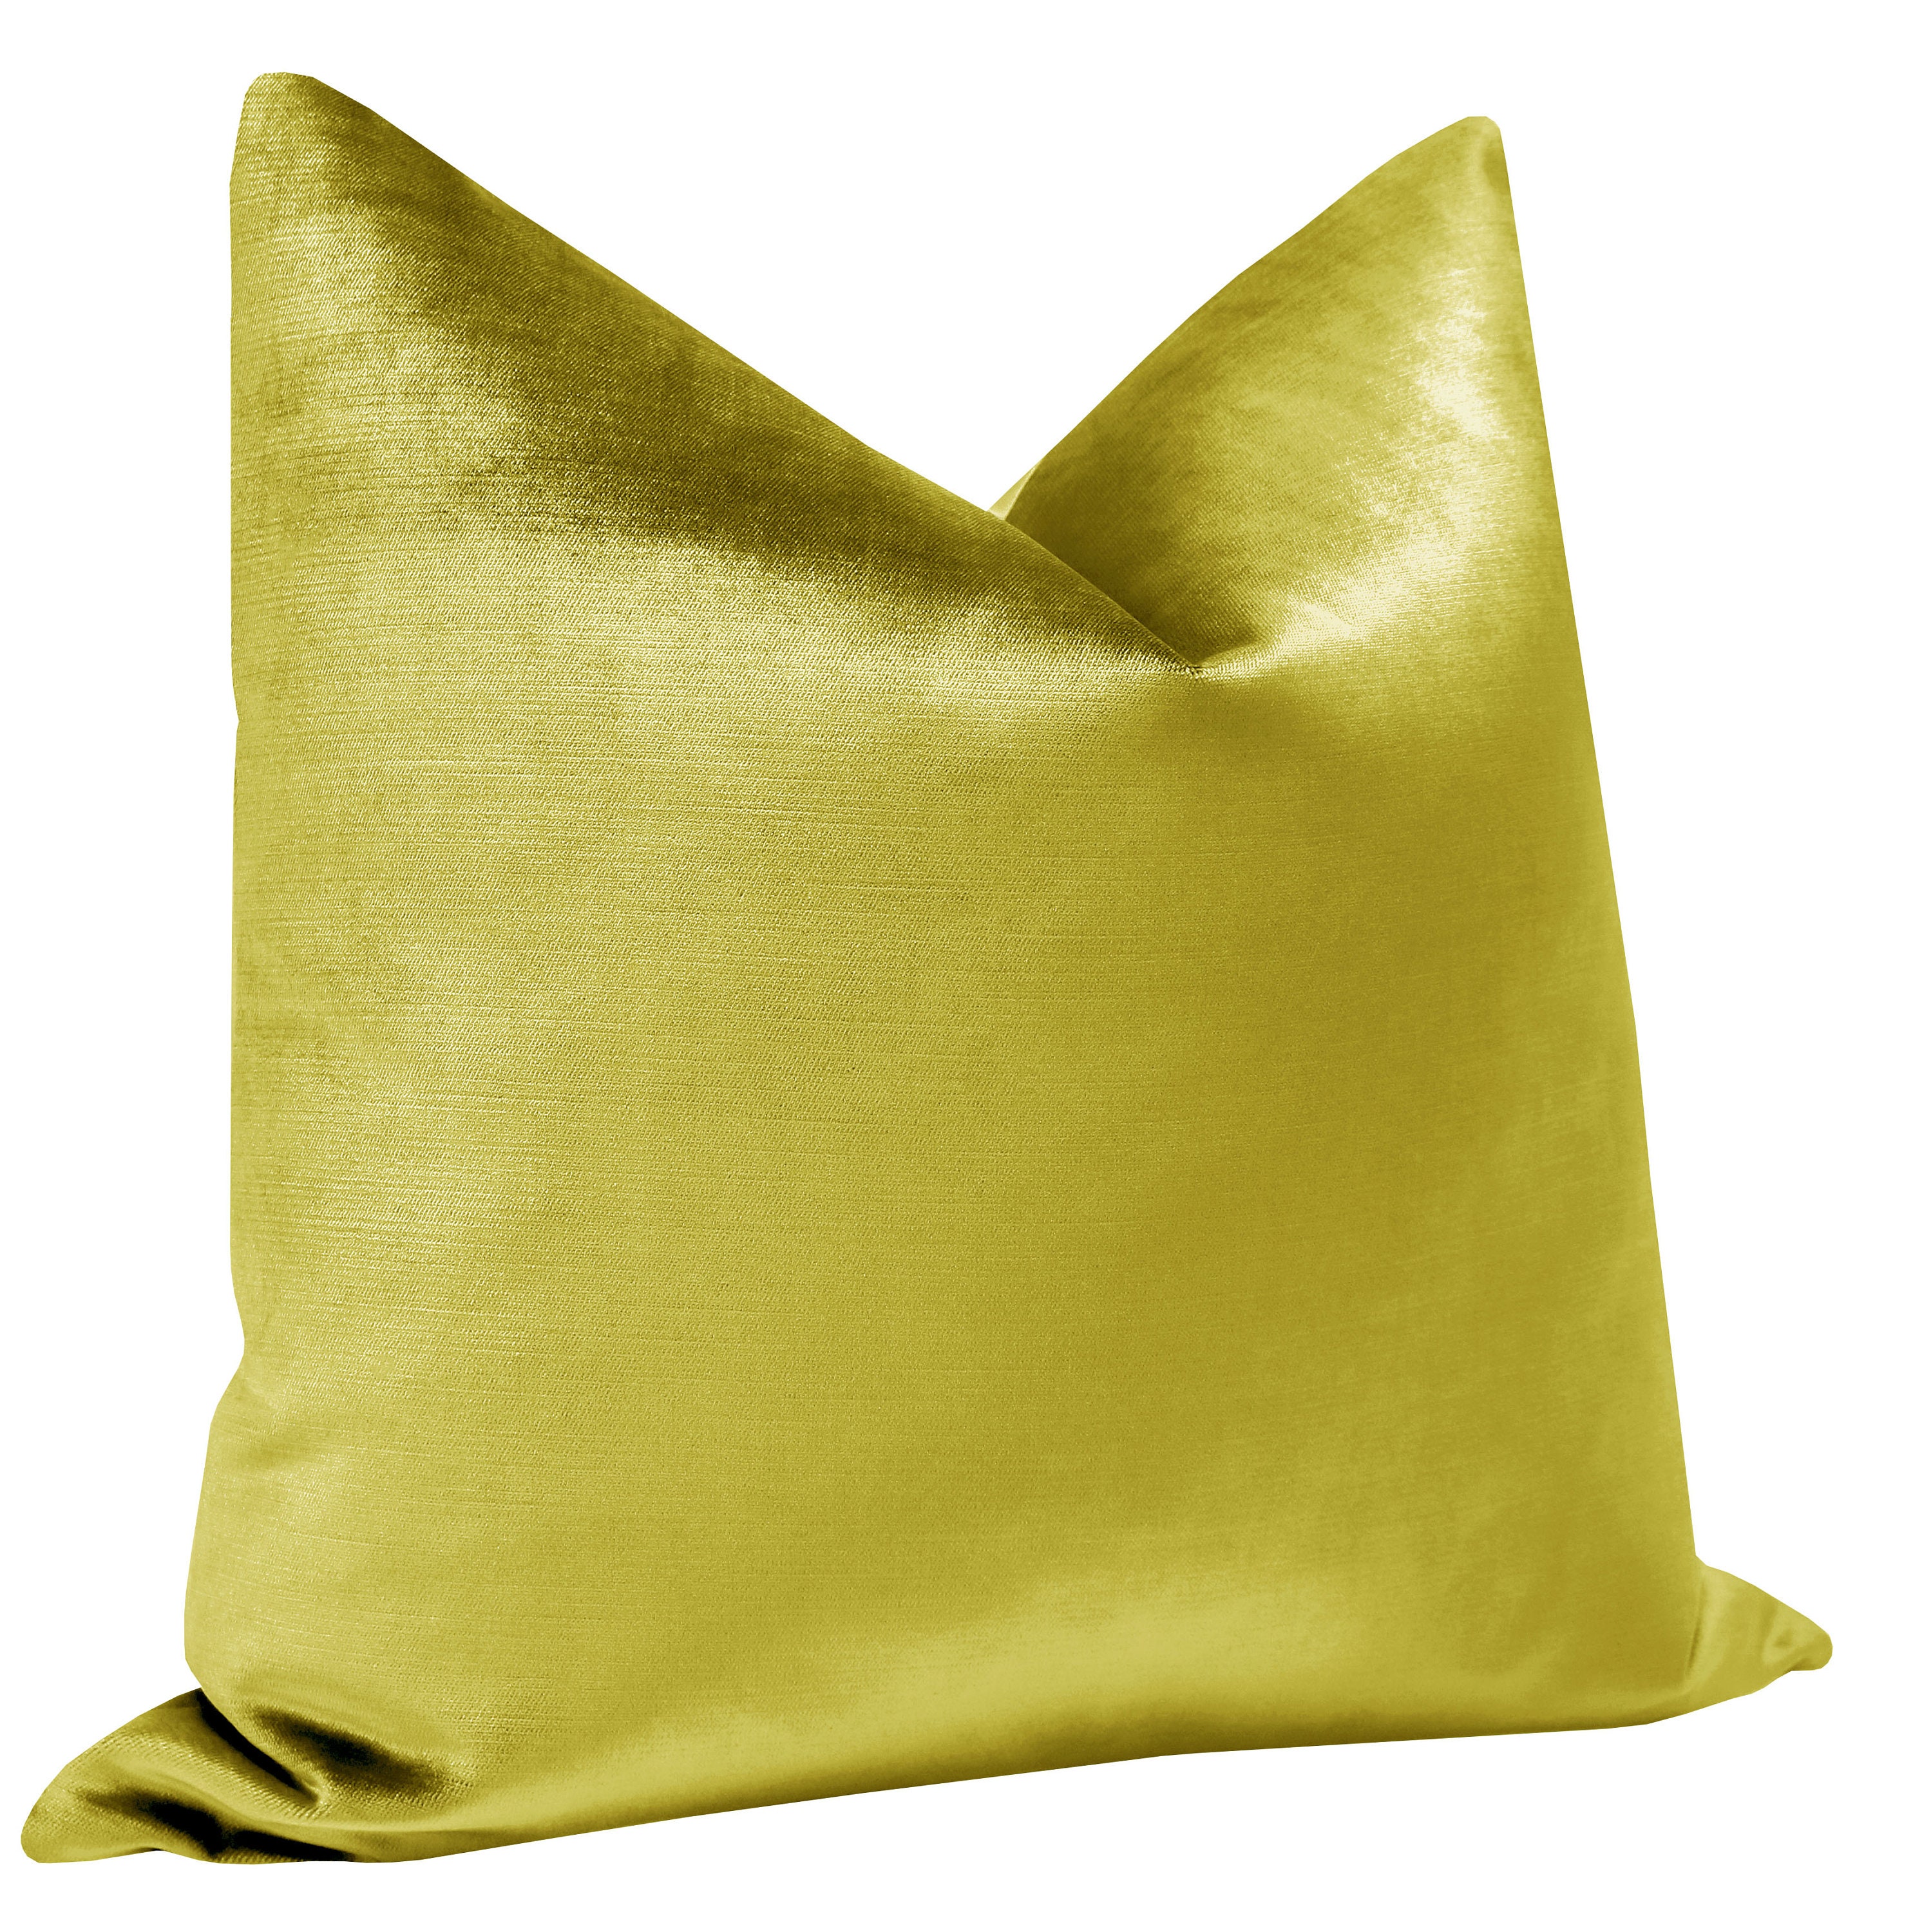 Terra Embroidered Green Pillow - Revibe Designs